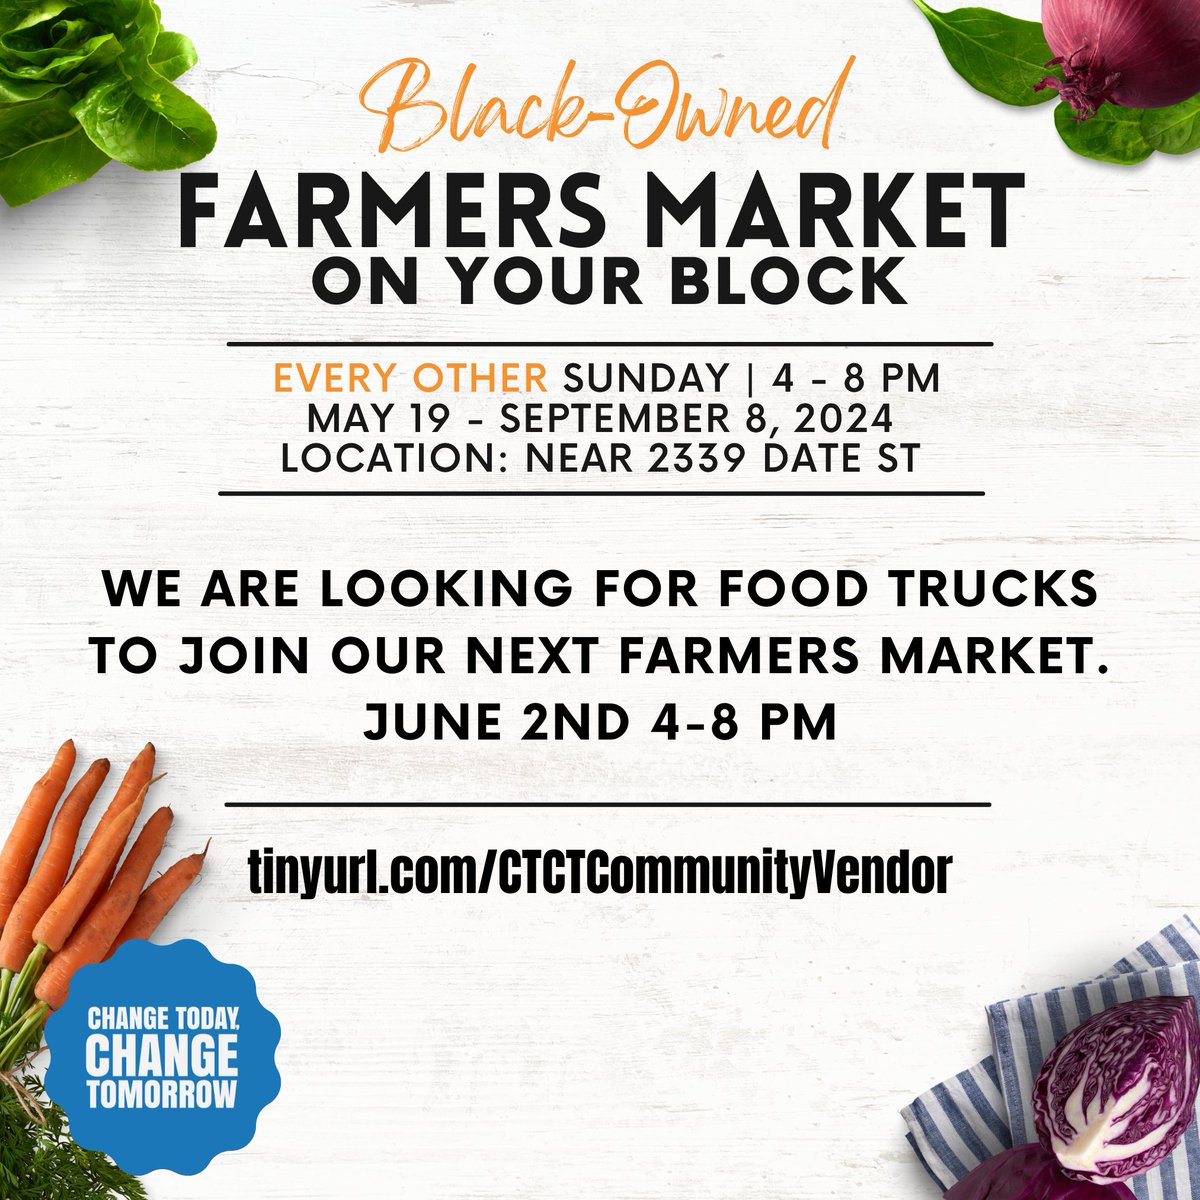 We are looking for food trucks to join our next Black-Owned Farmers Market on June 2nd from 4-8 PM. Visit tinyurl.com/CTCTCommunityV… to sign up. Tag your favorite food truck below!